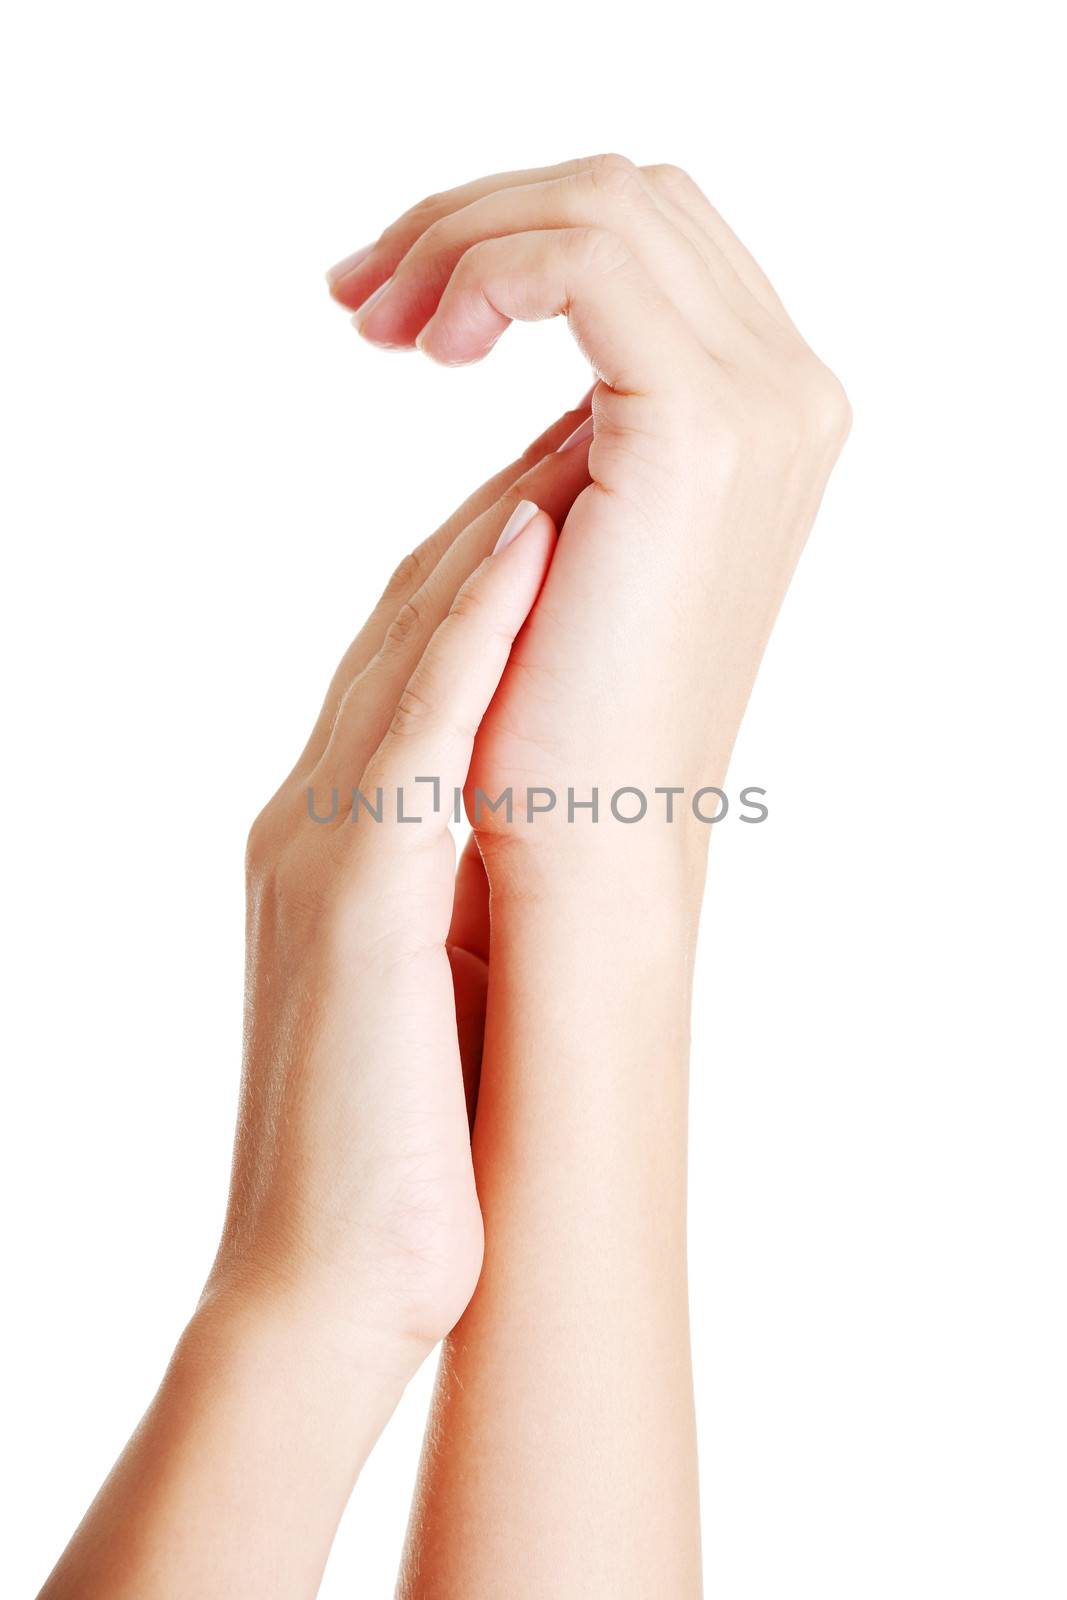 Hands care concept. Close up shoot of beautiful female hands